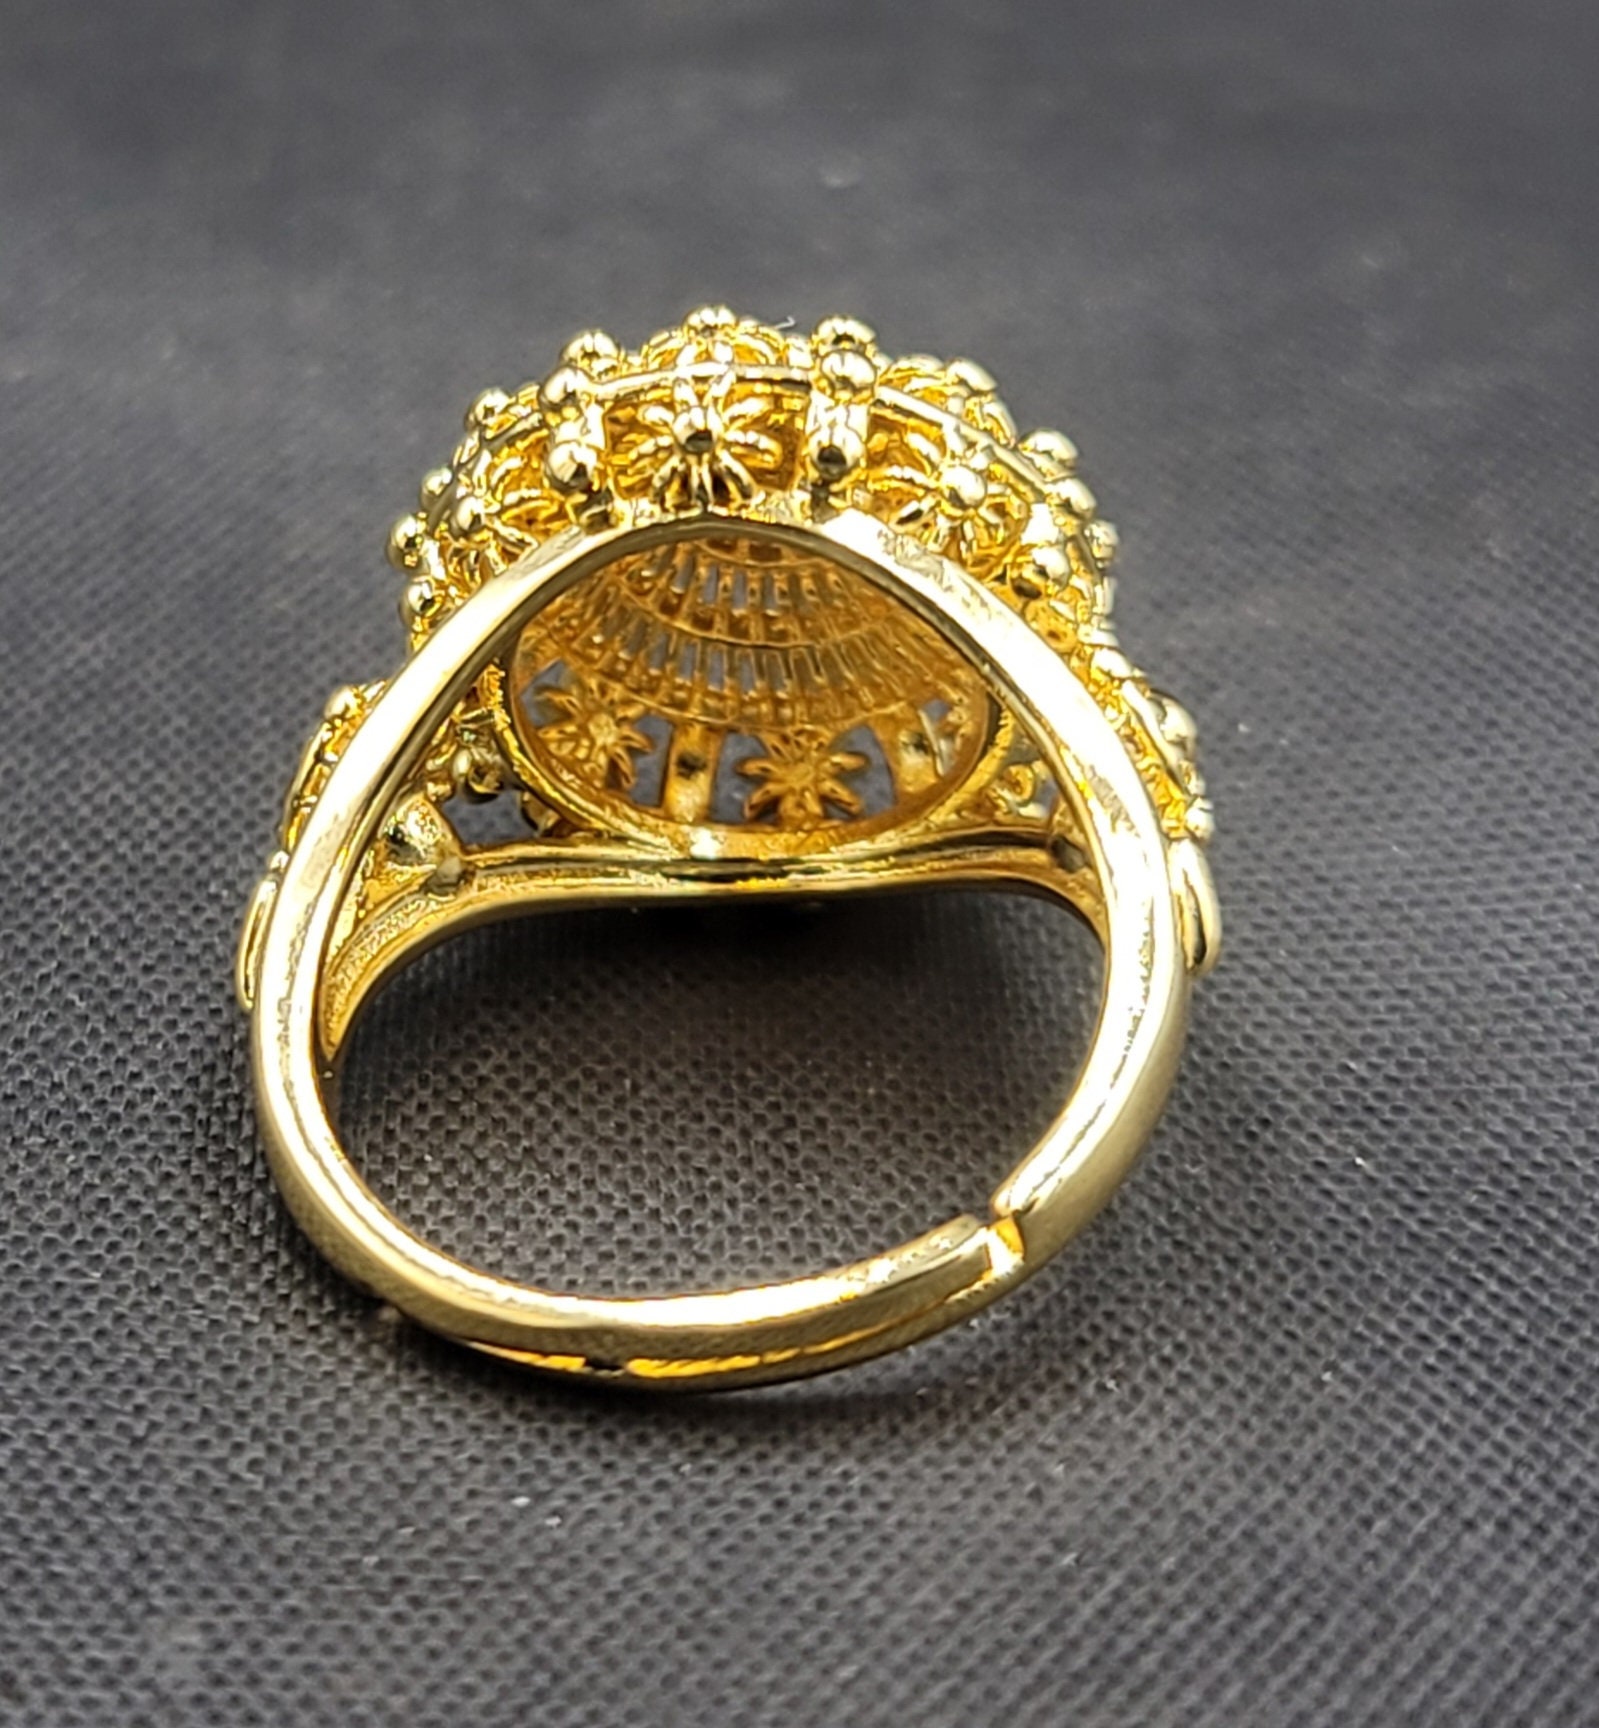 Two Vintage Rhinestone Rings Made in Hong Kong Gold Tone